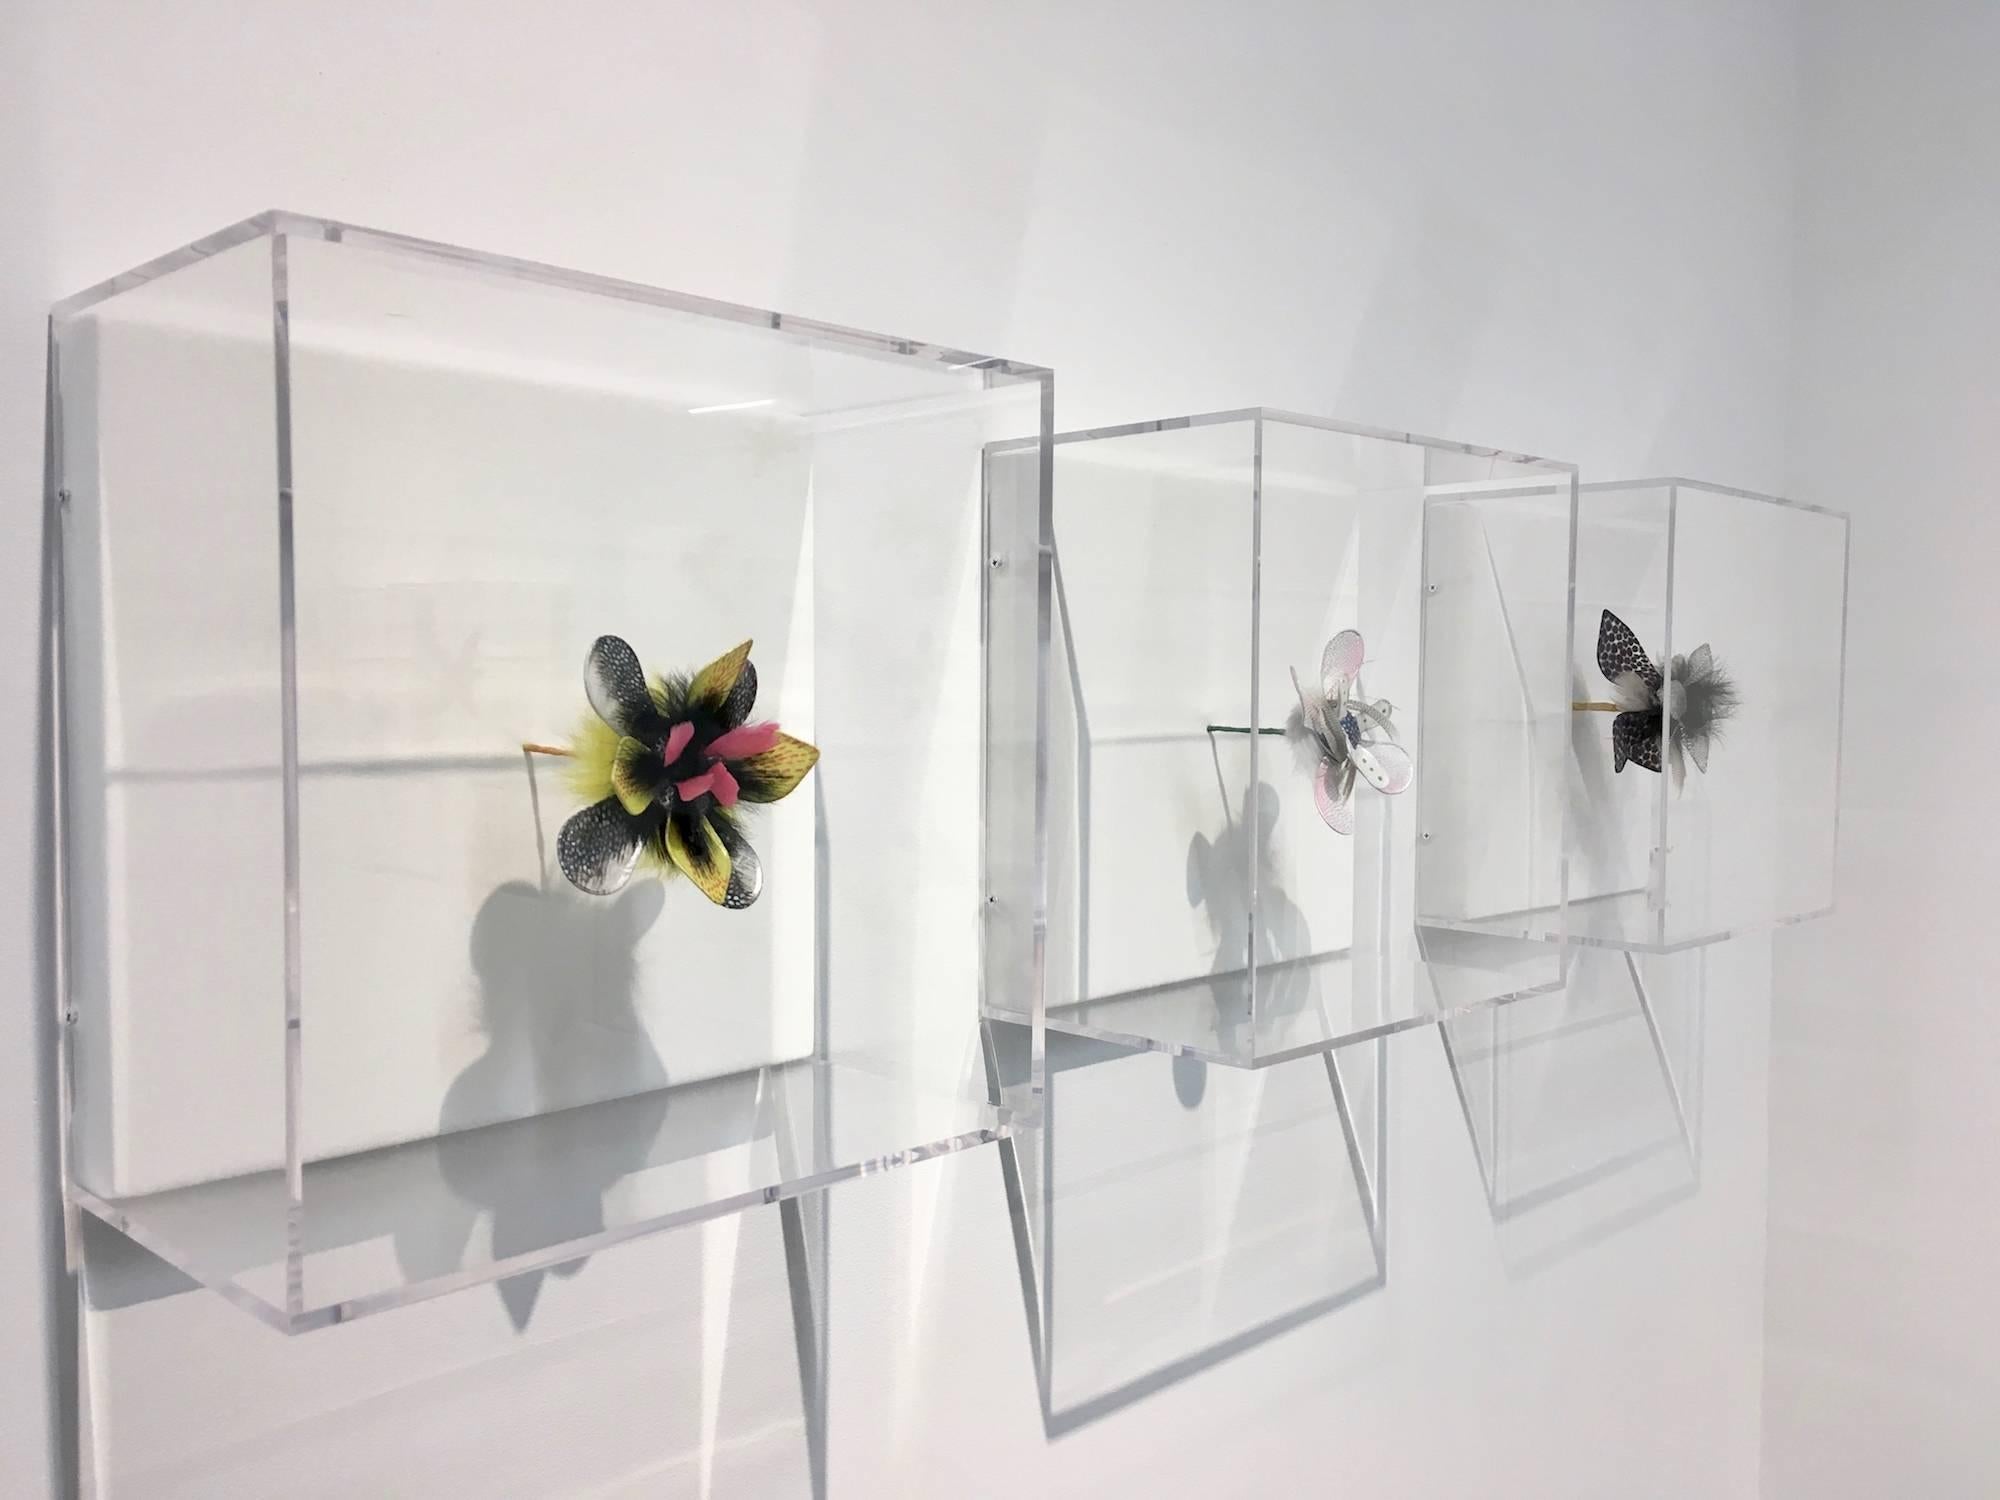 Jill Parisi's masterful sculptures are showcased in this exciting display of a single sculpture of pink, gray, blue, and green acrylic ink on white handmade overbeaten abaca fiber with gray feathers. The papers are hand-cut and arranged in floral